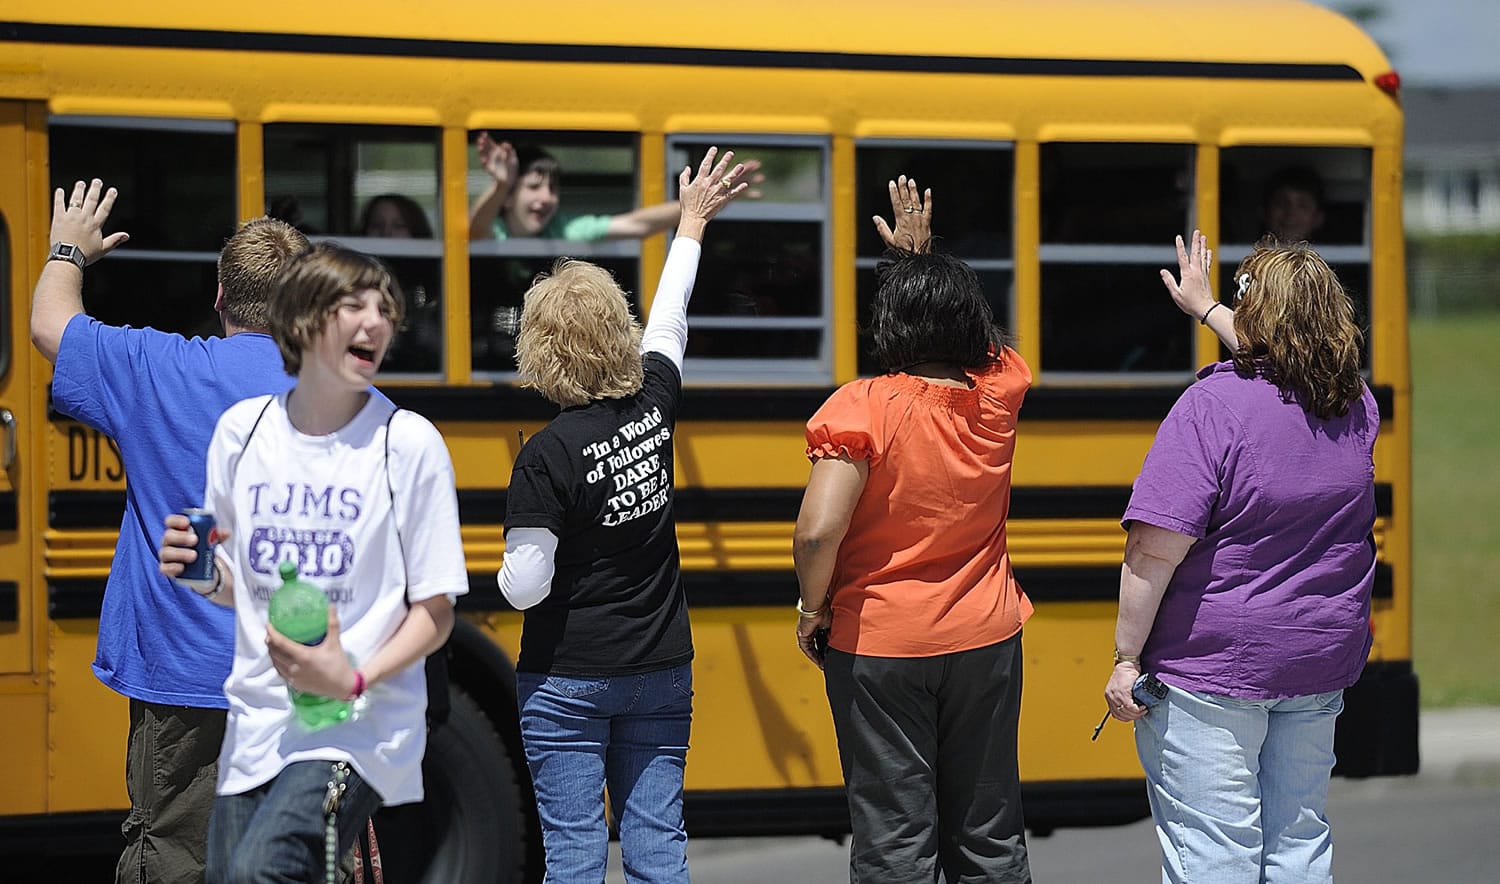 Staff and faculty at Thomas Jefferson Middle School wave goodbye to buses filled with students as they head home for summer break June 22, 2010 in Vancouver, Washington.